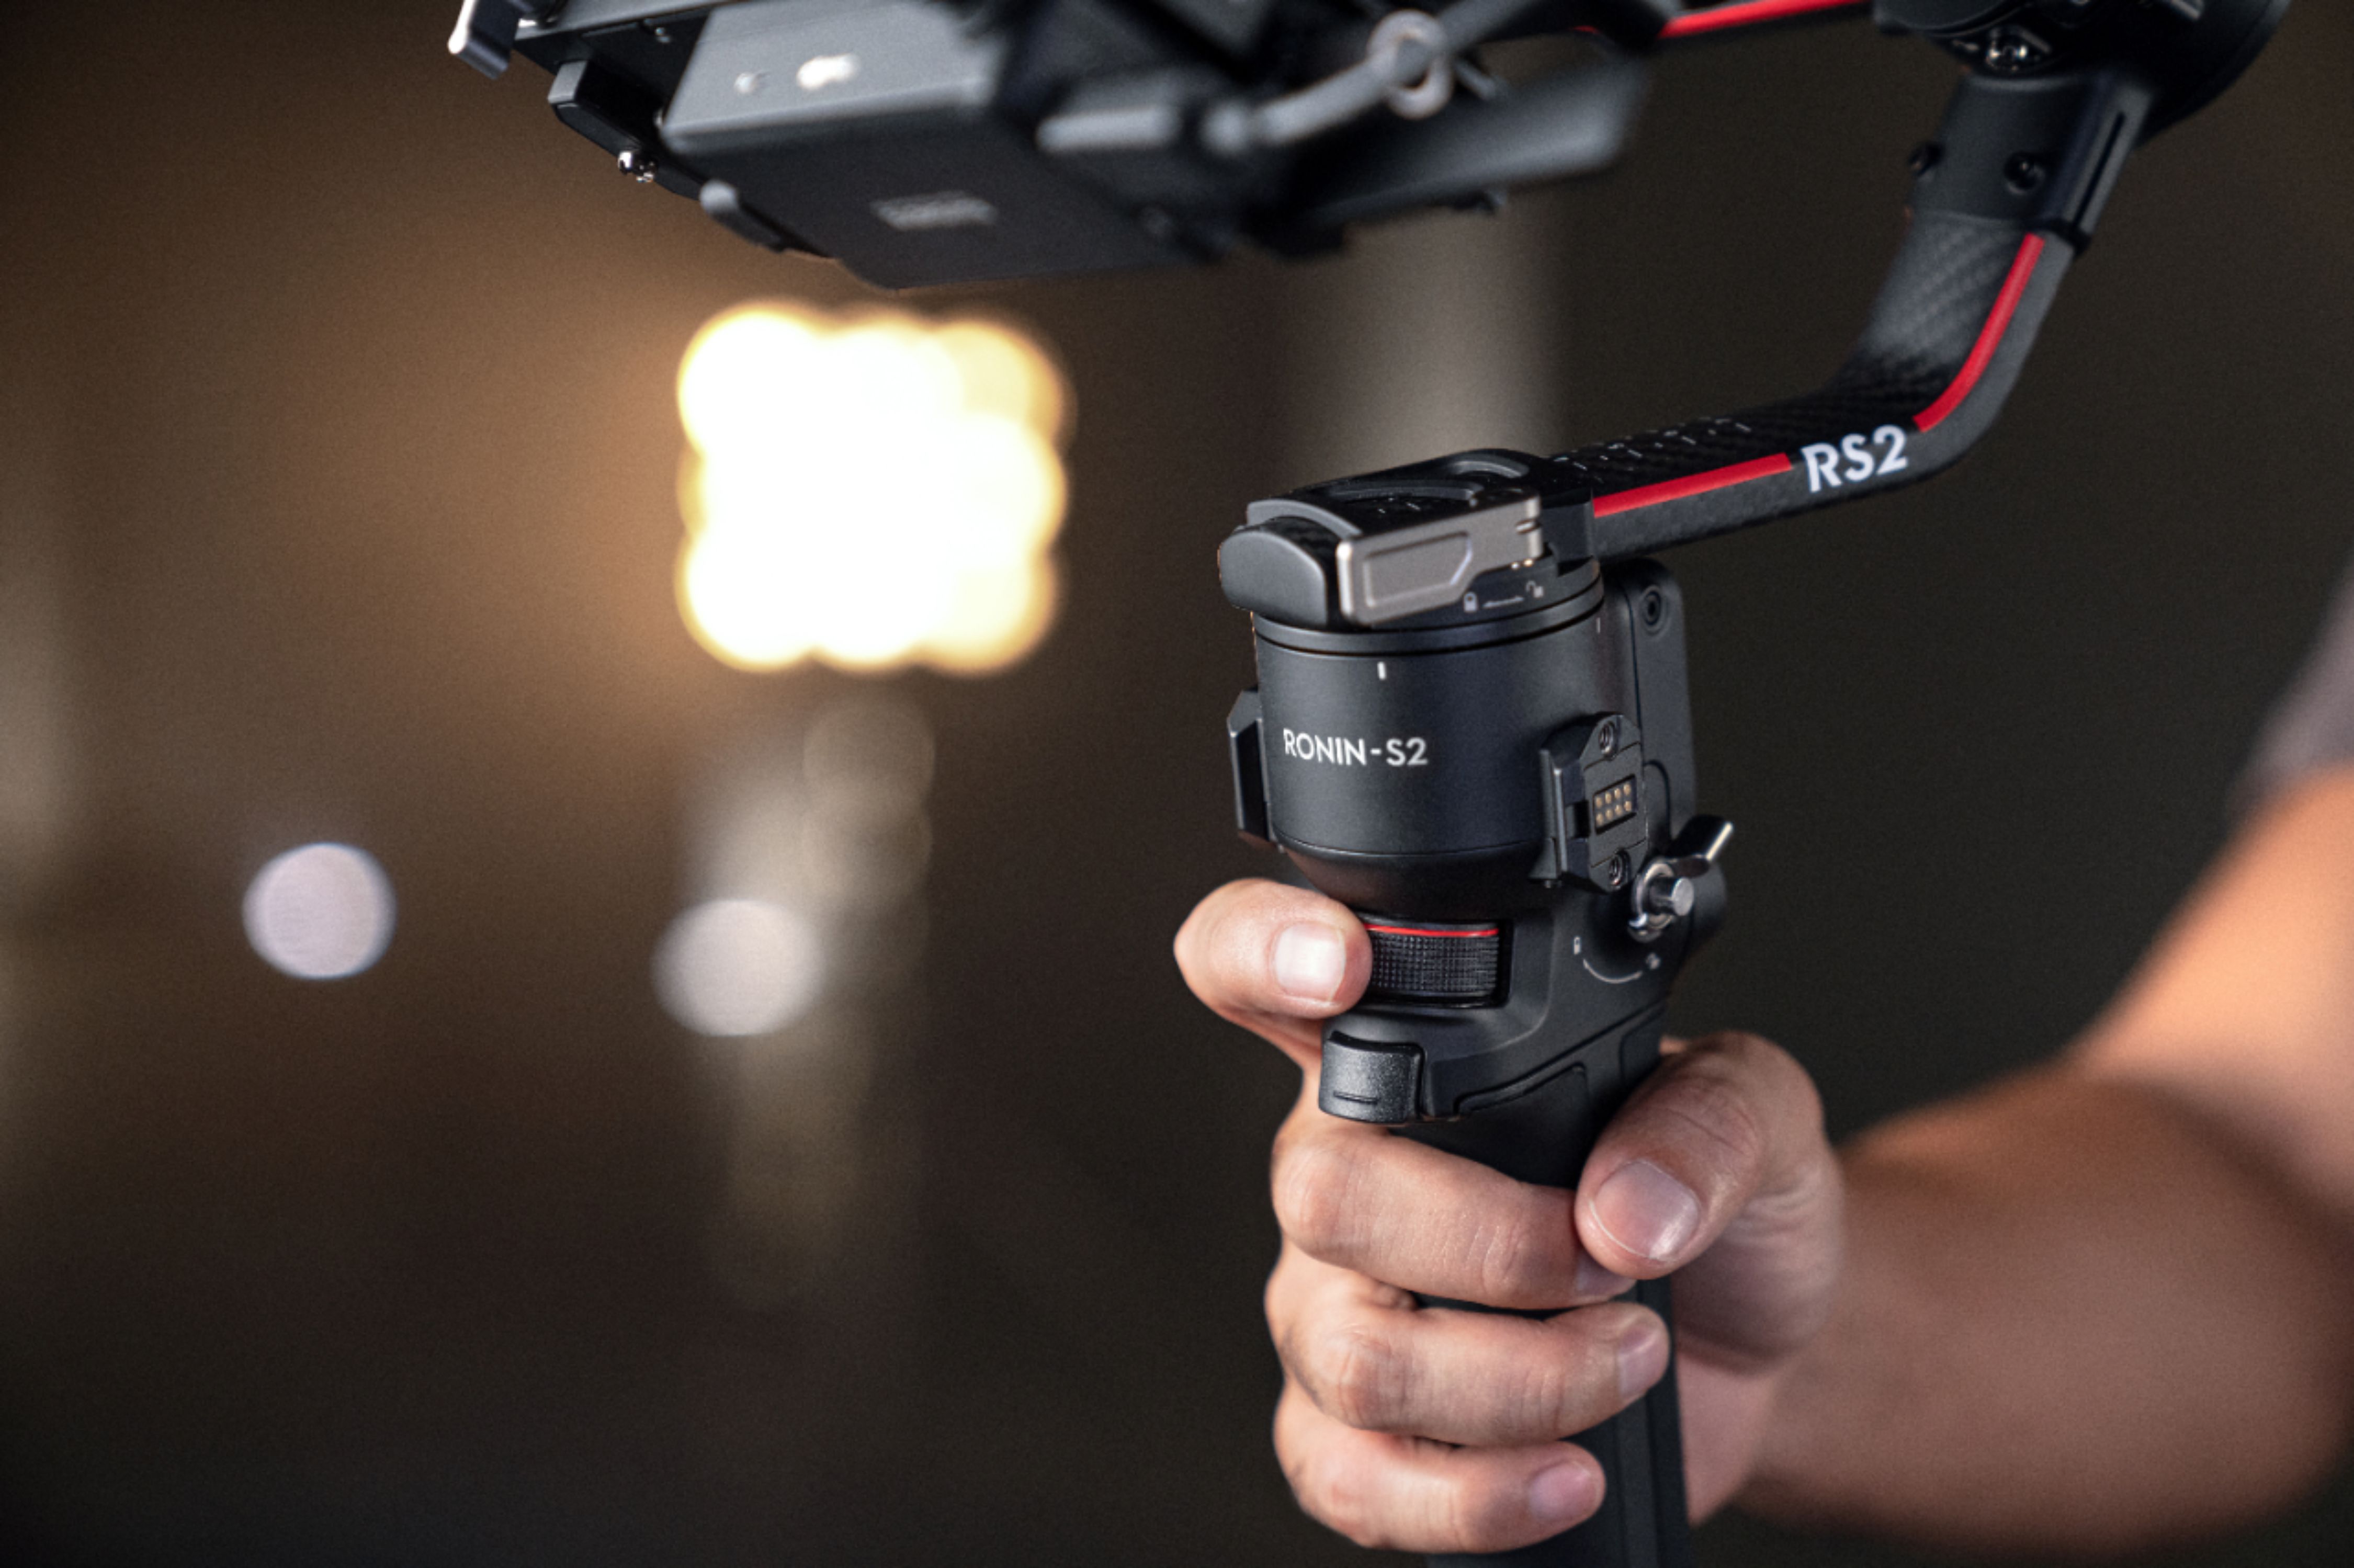 Best Buy: DJI RS 2 Pro Combo 3-Axis Gimbal Stabilizer CP.RN